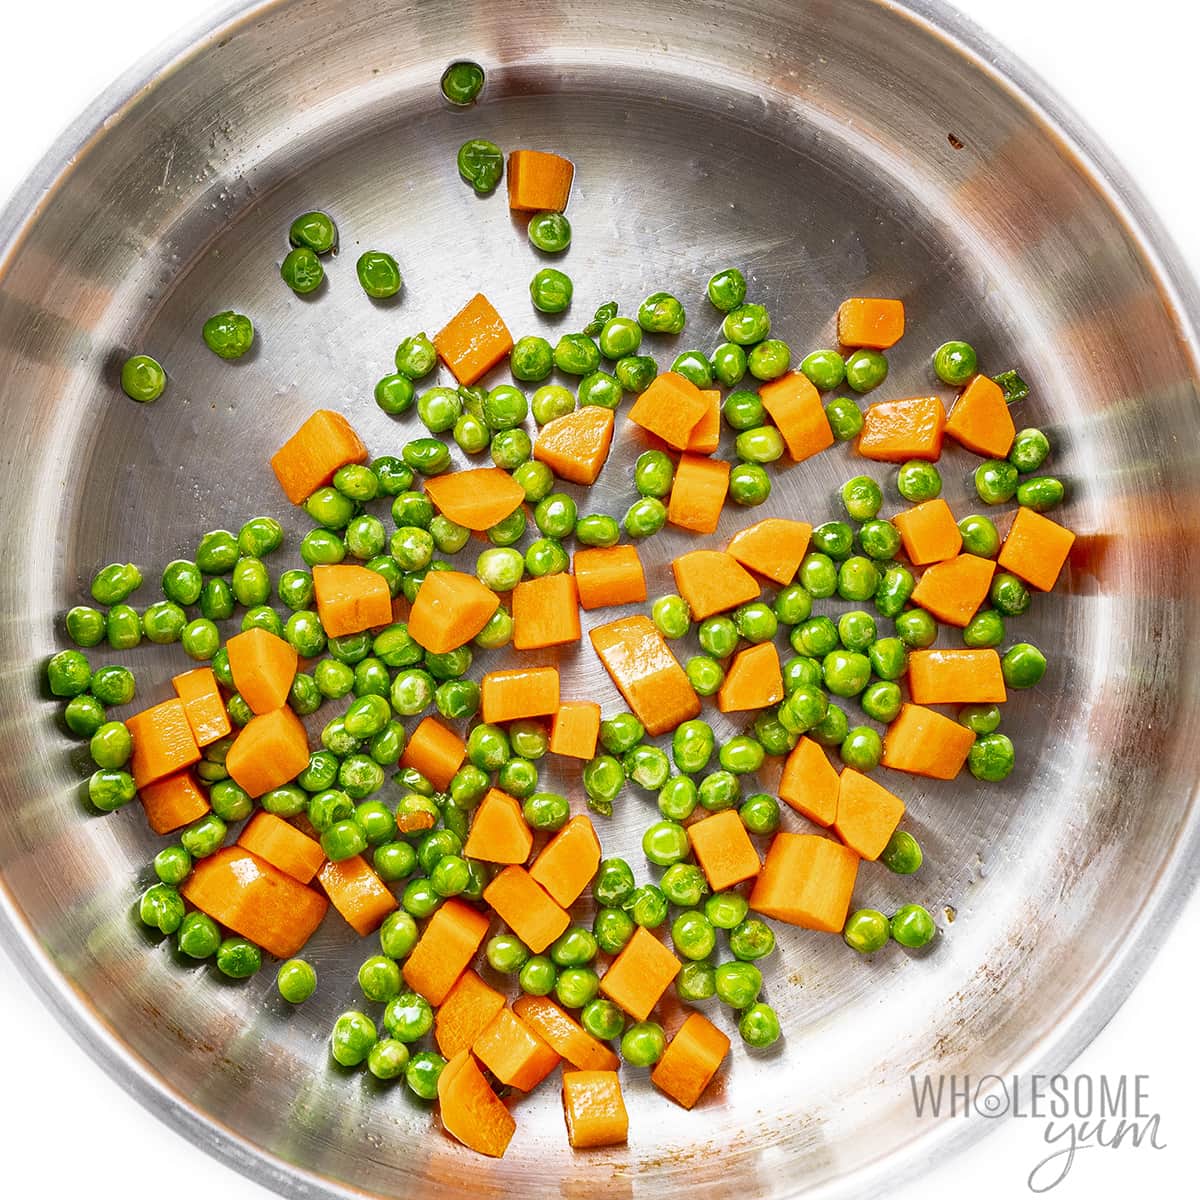 Sauteed peas and carrots in a skillet.